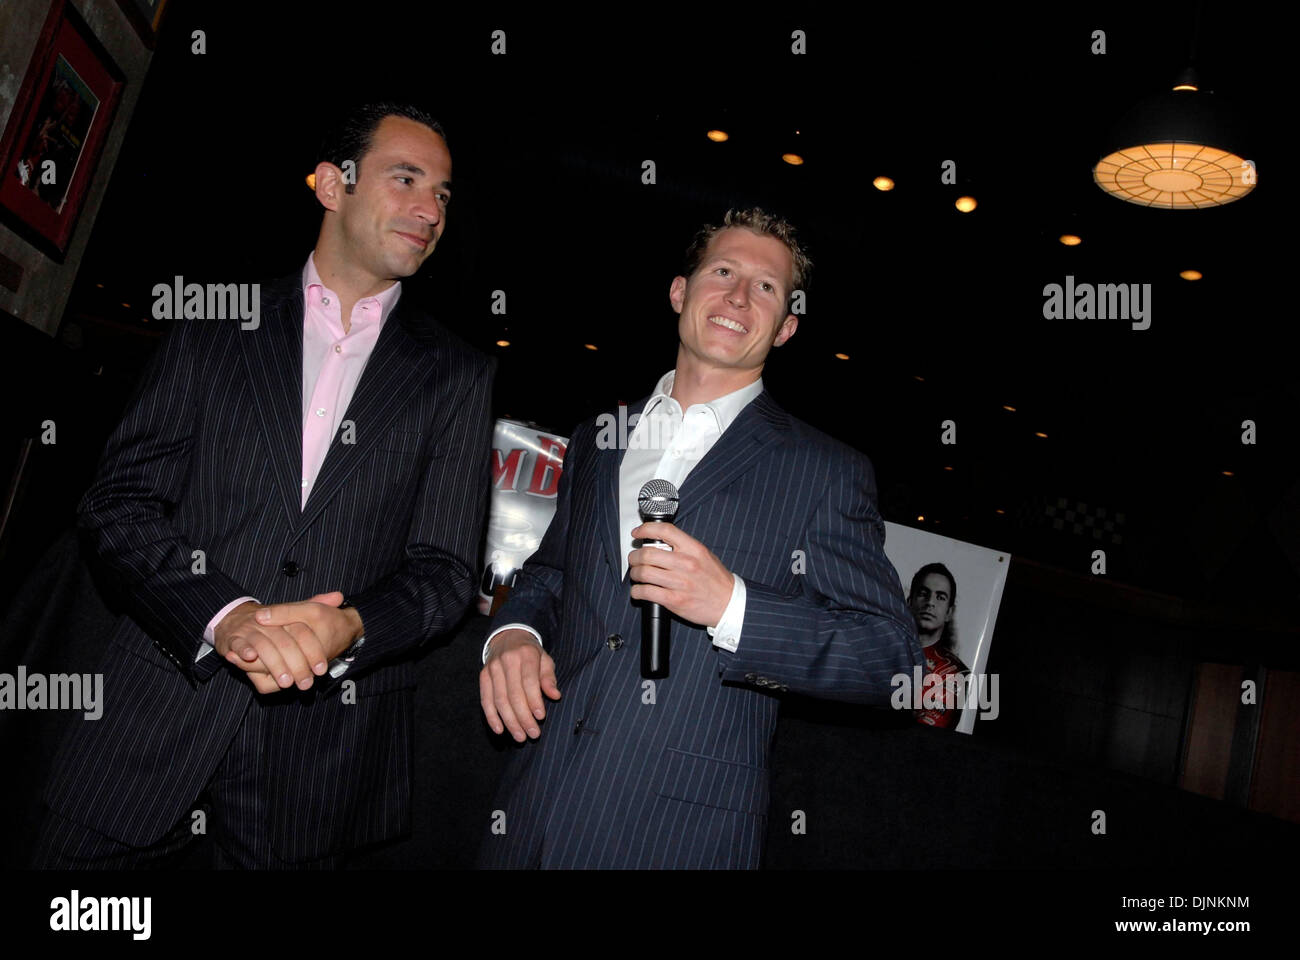 May 24, 2008 - Indianapolis, Indiana, USA - Indy 500 race car drivers RYAN BRISCOE and HELIO CASTRONEVES talk to a group of Jim Beam employees the night before the 2008 Indianapolis 500. Jim Beam sponsored both Castroneves and Briscoe in the 2008 Indy 500. (Credit Image: © Mark Murrmann/ZUMA Press) Stock Photo